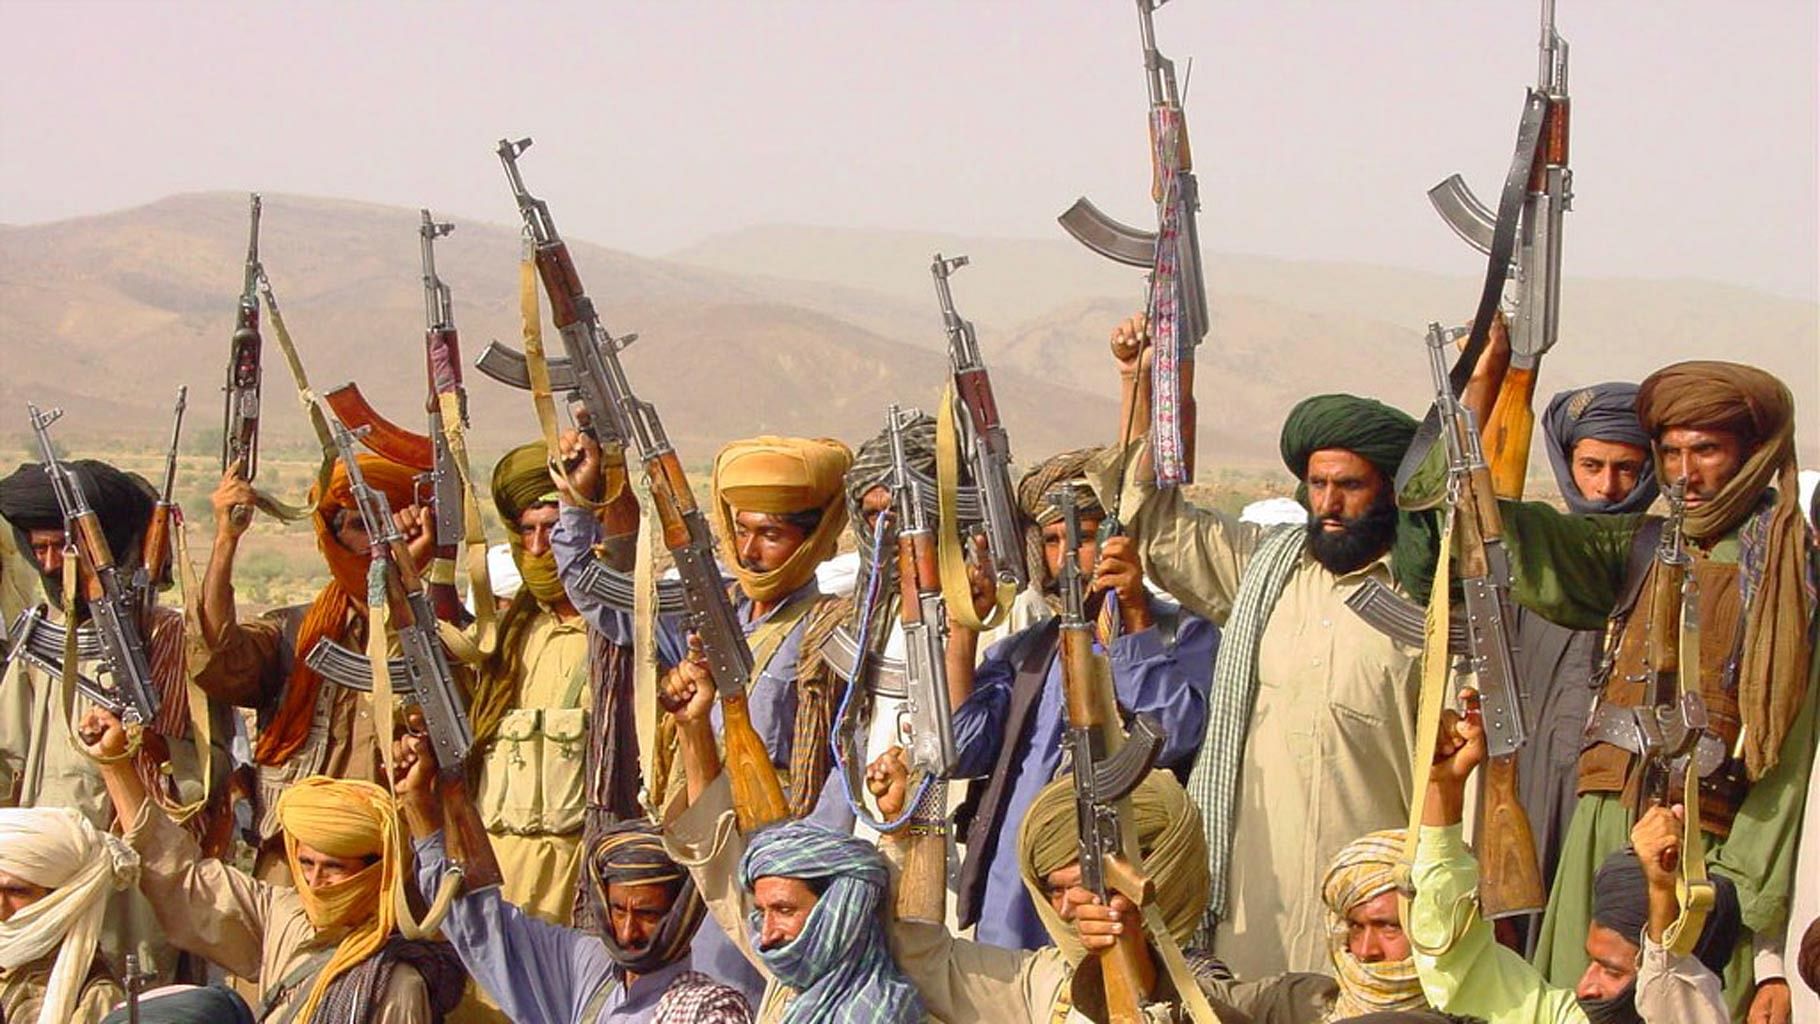 Marri Baloch tribemen up in arms against Pakistani army men. Photo used for representational purpose. (Photo: Reuters)